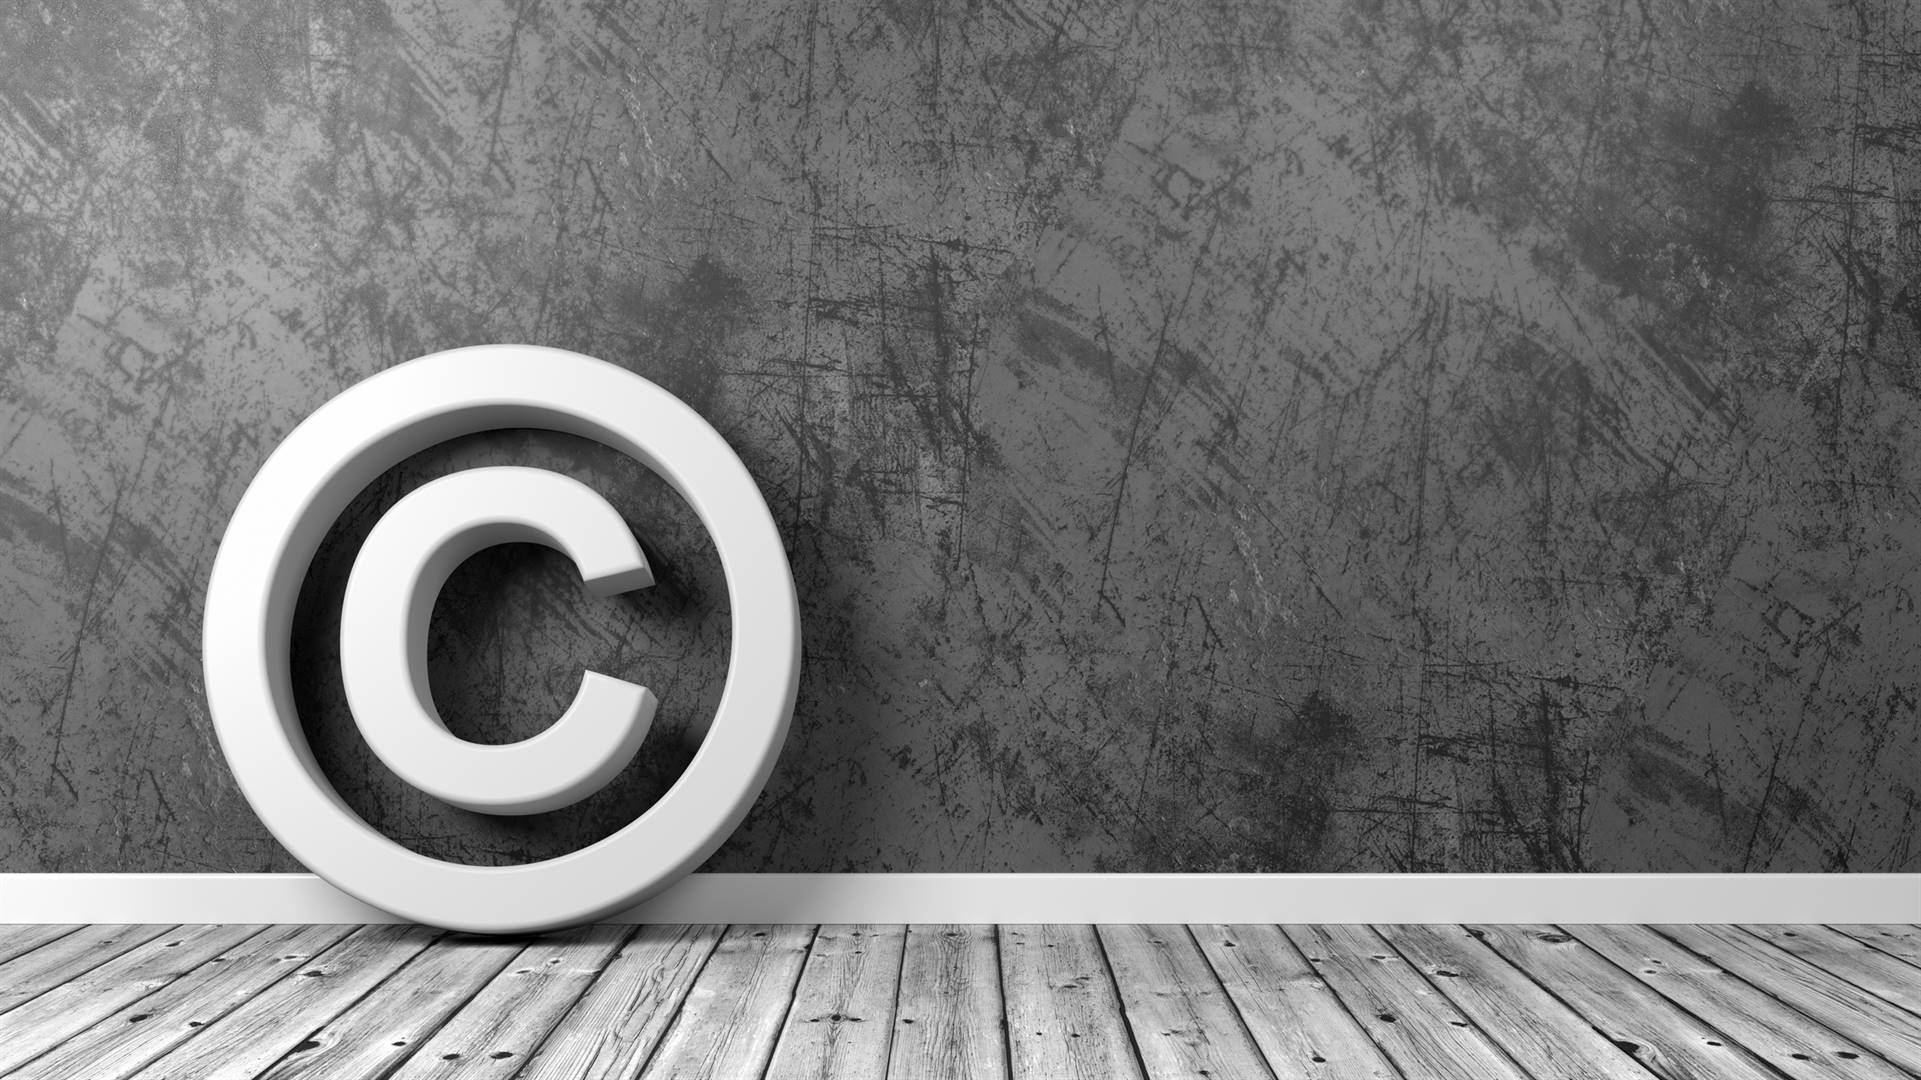 Awareness must be raised about this flawed copyright bill being rushed through Parliament, and the vested interests trying to make that happen, writes Collen Dlamini. Picture: iStock/Gallo Images